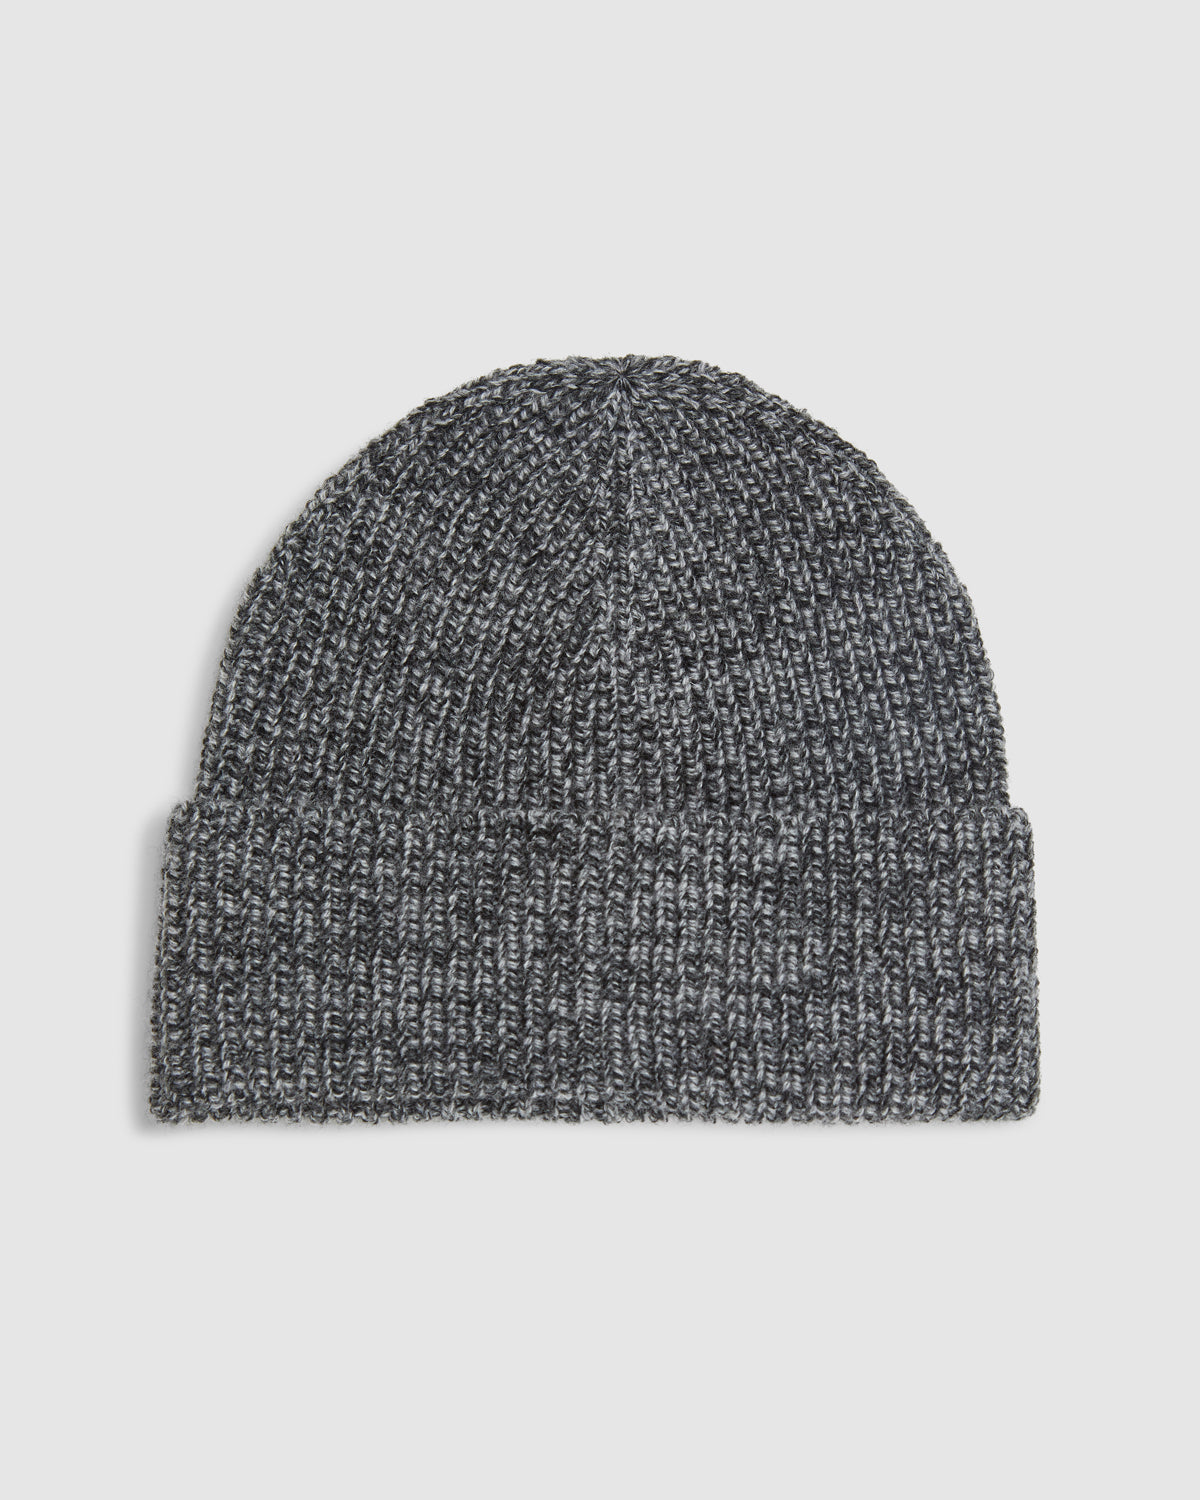 Ribbed Knit Beanie | Charcoal Mix - Toorallie - Beechworth Emporium